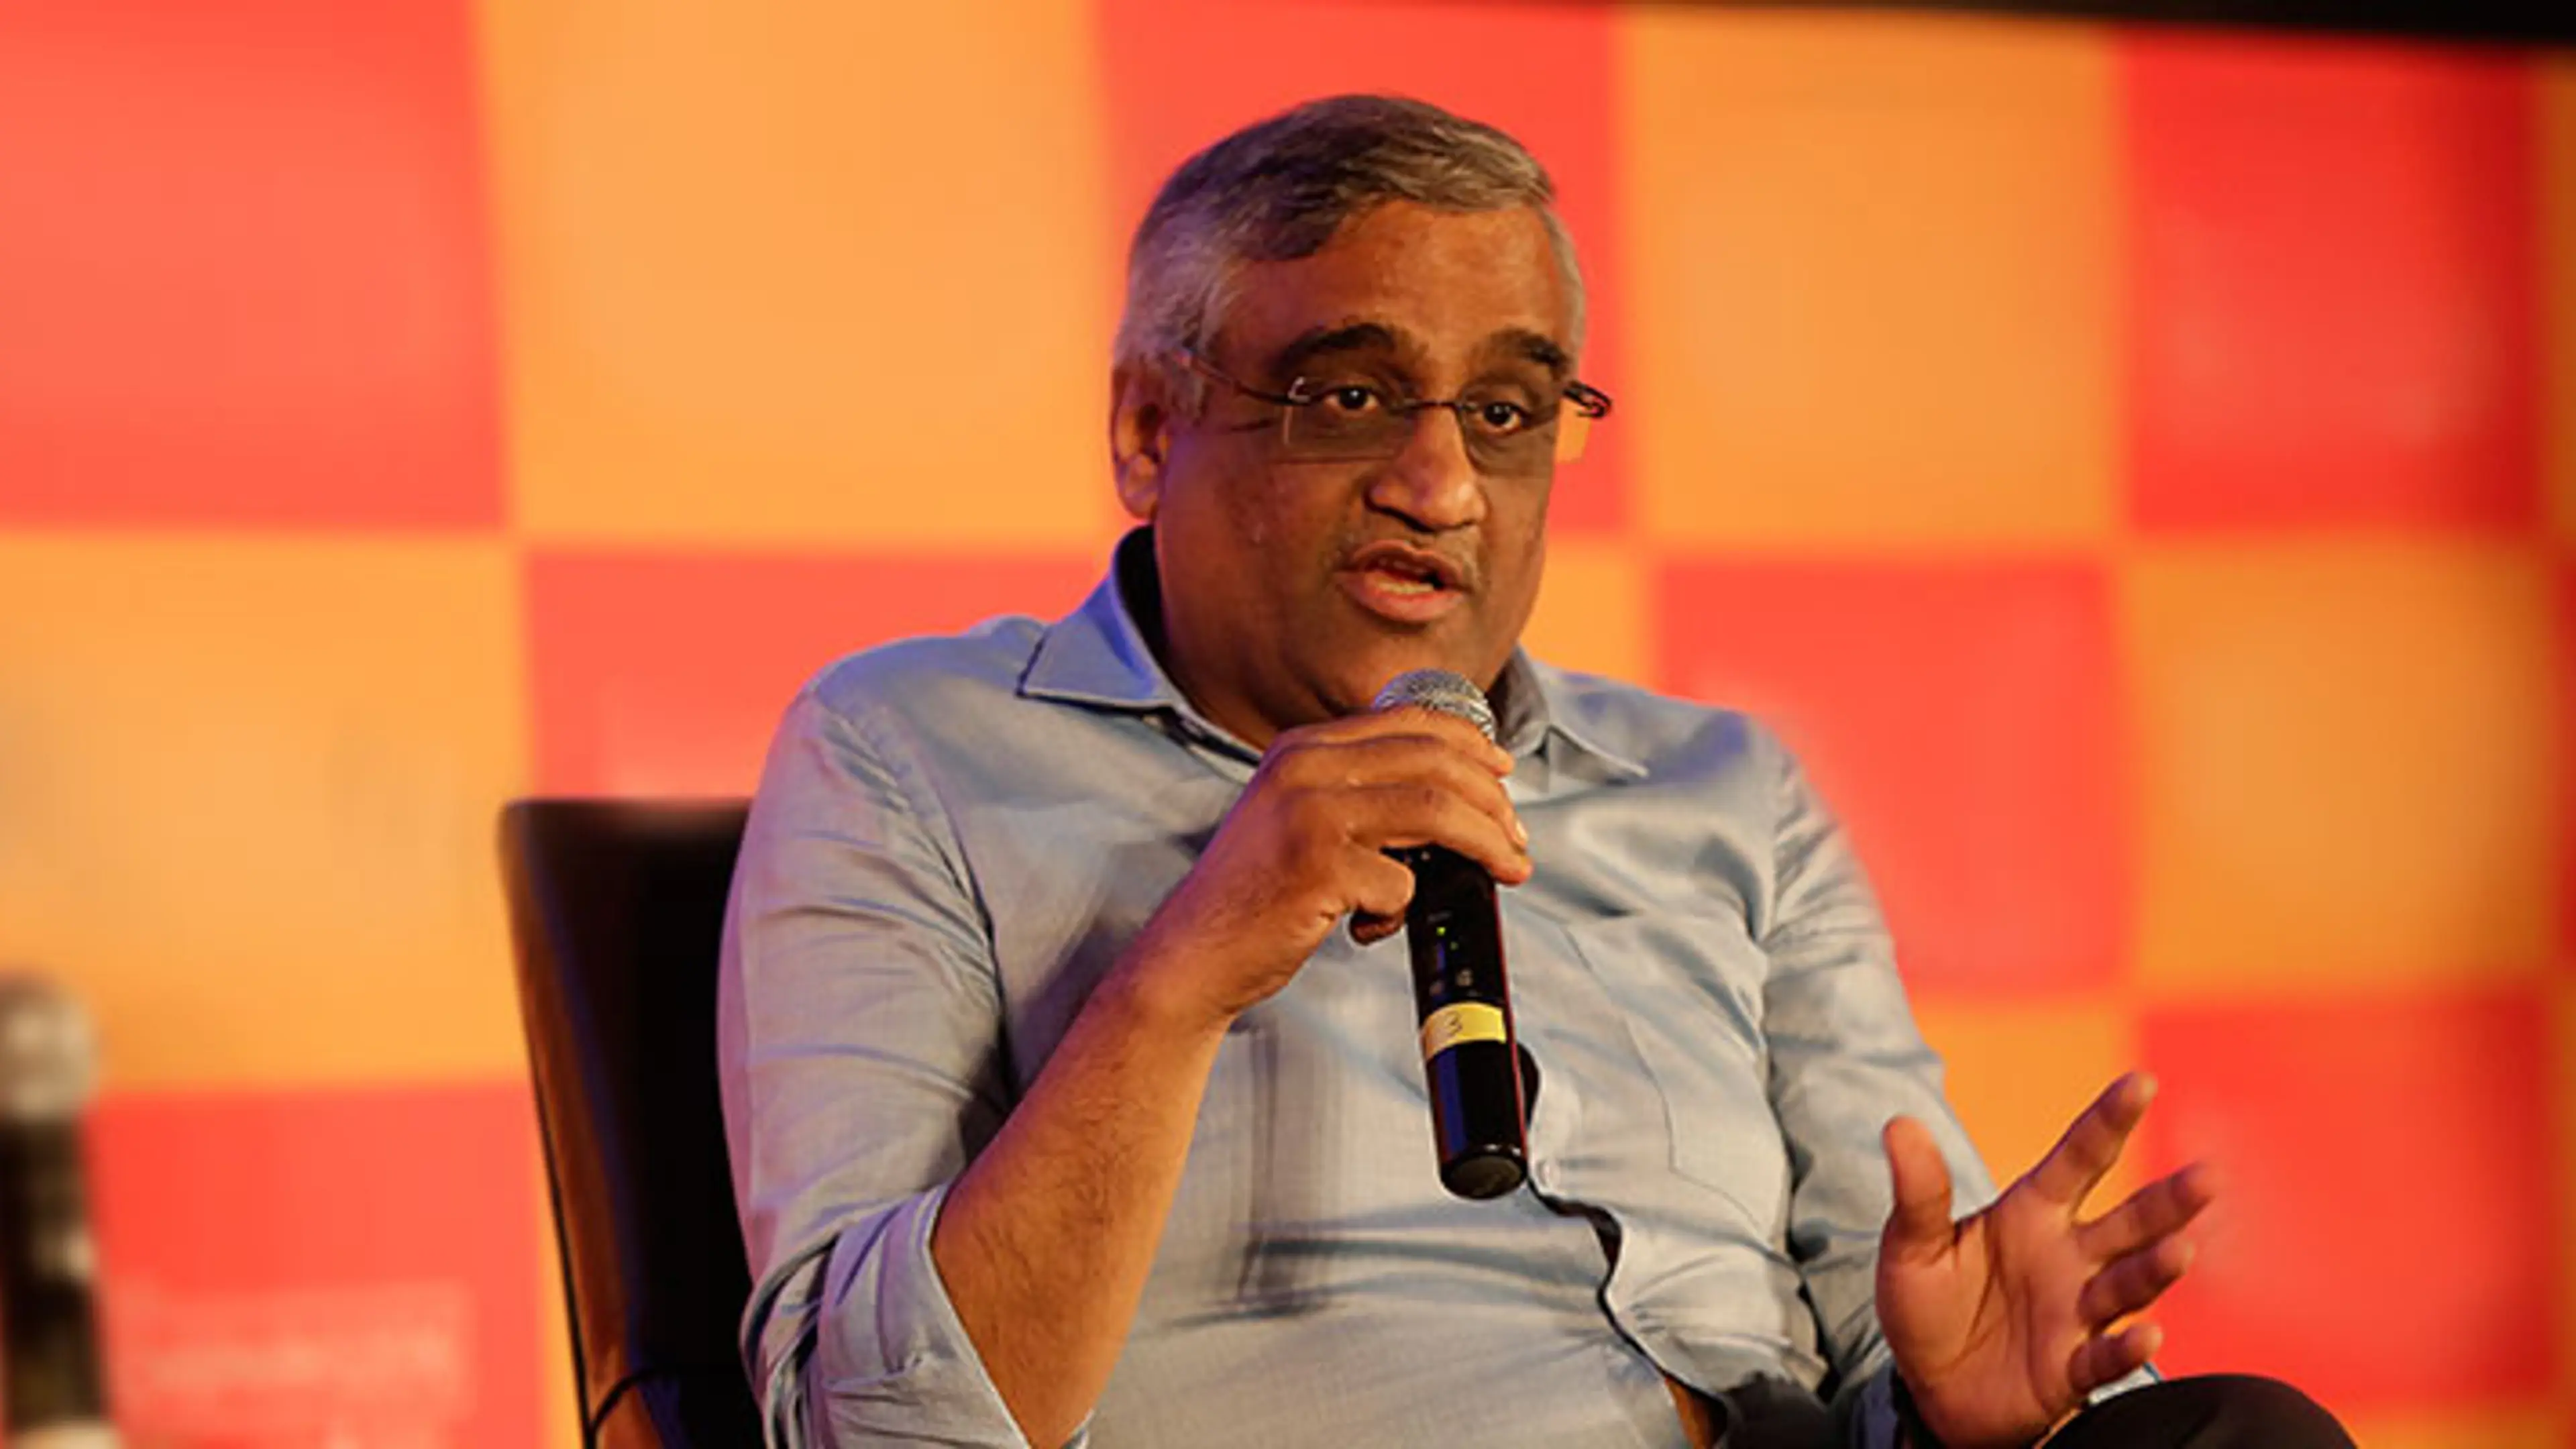 Future Retail resolution professional moves NCLT against Kishore Biyani and family alleging fraudulent transaction